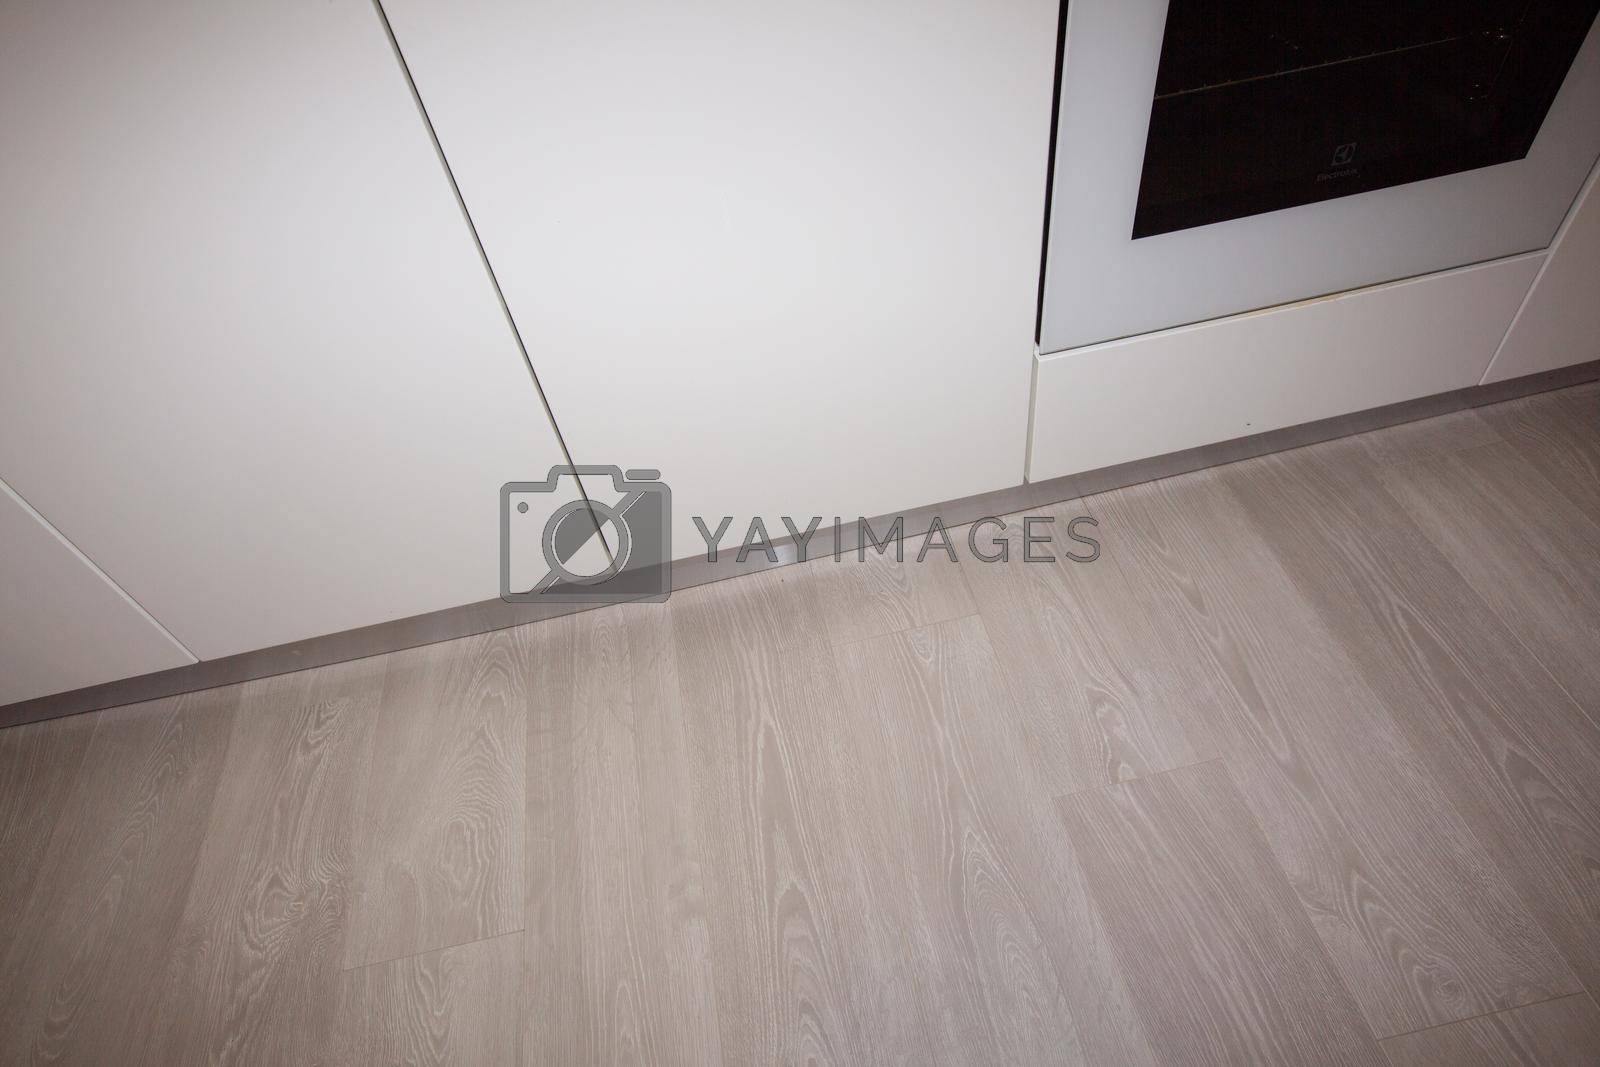 Royalty free image of New kitchen in renovated house with laminated timber flooring by Andelov13